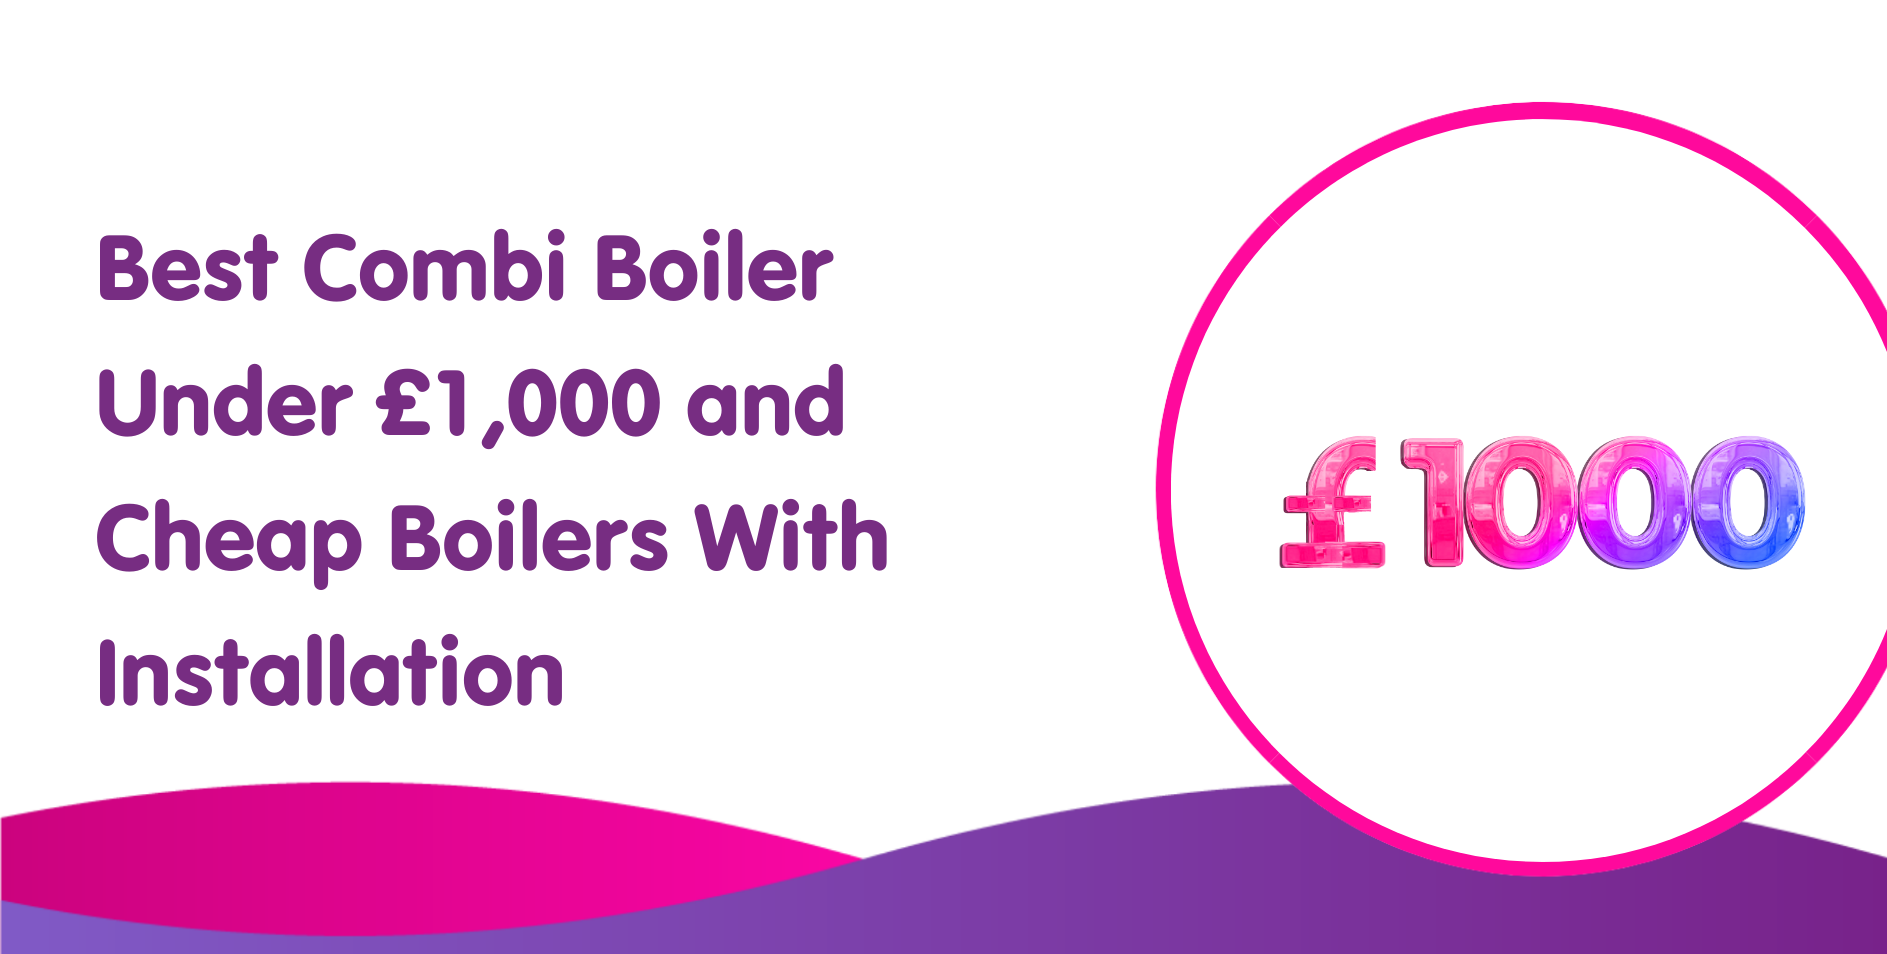 Best Combi Boiler Under £1,000 and Cheap Boilers With Installation